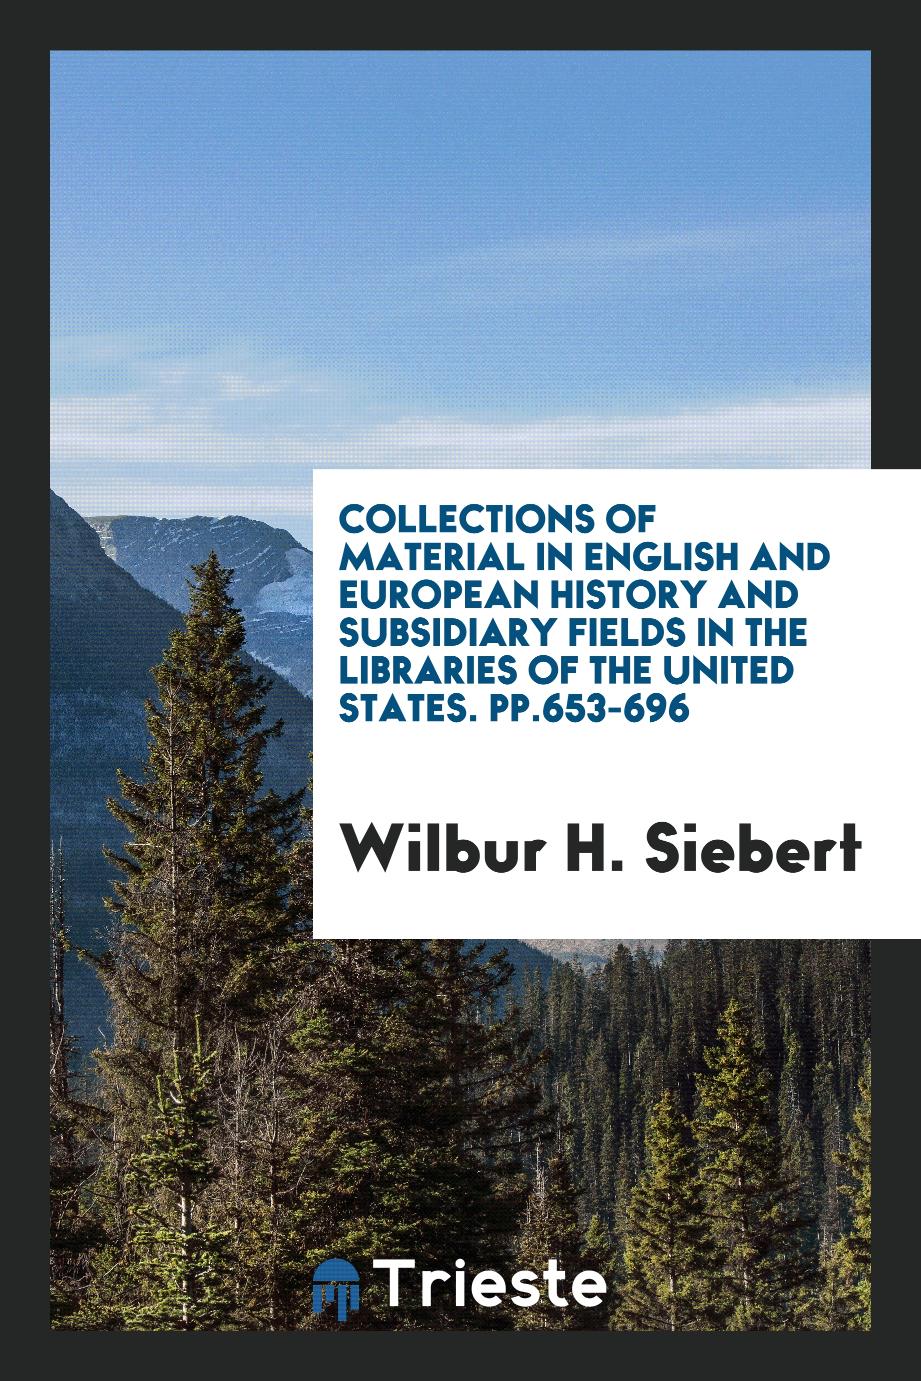 Collections of Material in English and European History and Subsidiary Fields in the Libraries of the United States. pp.653-696